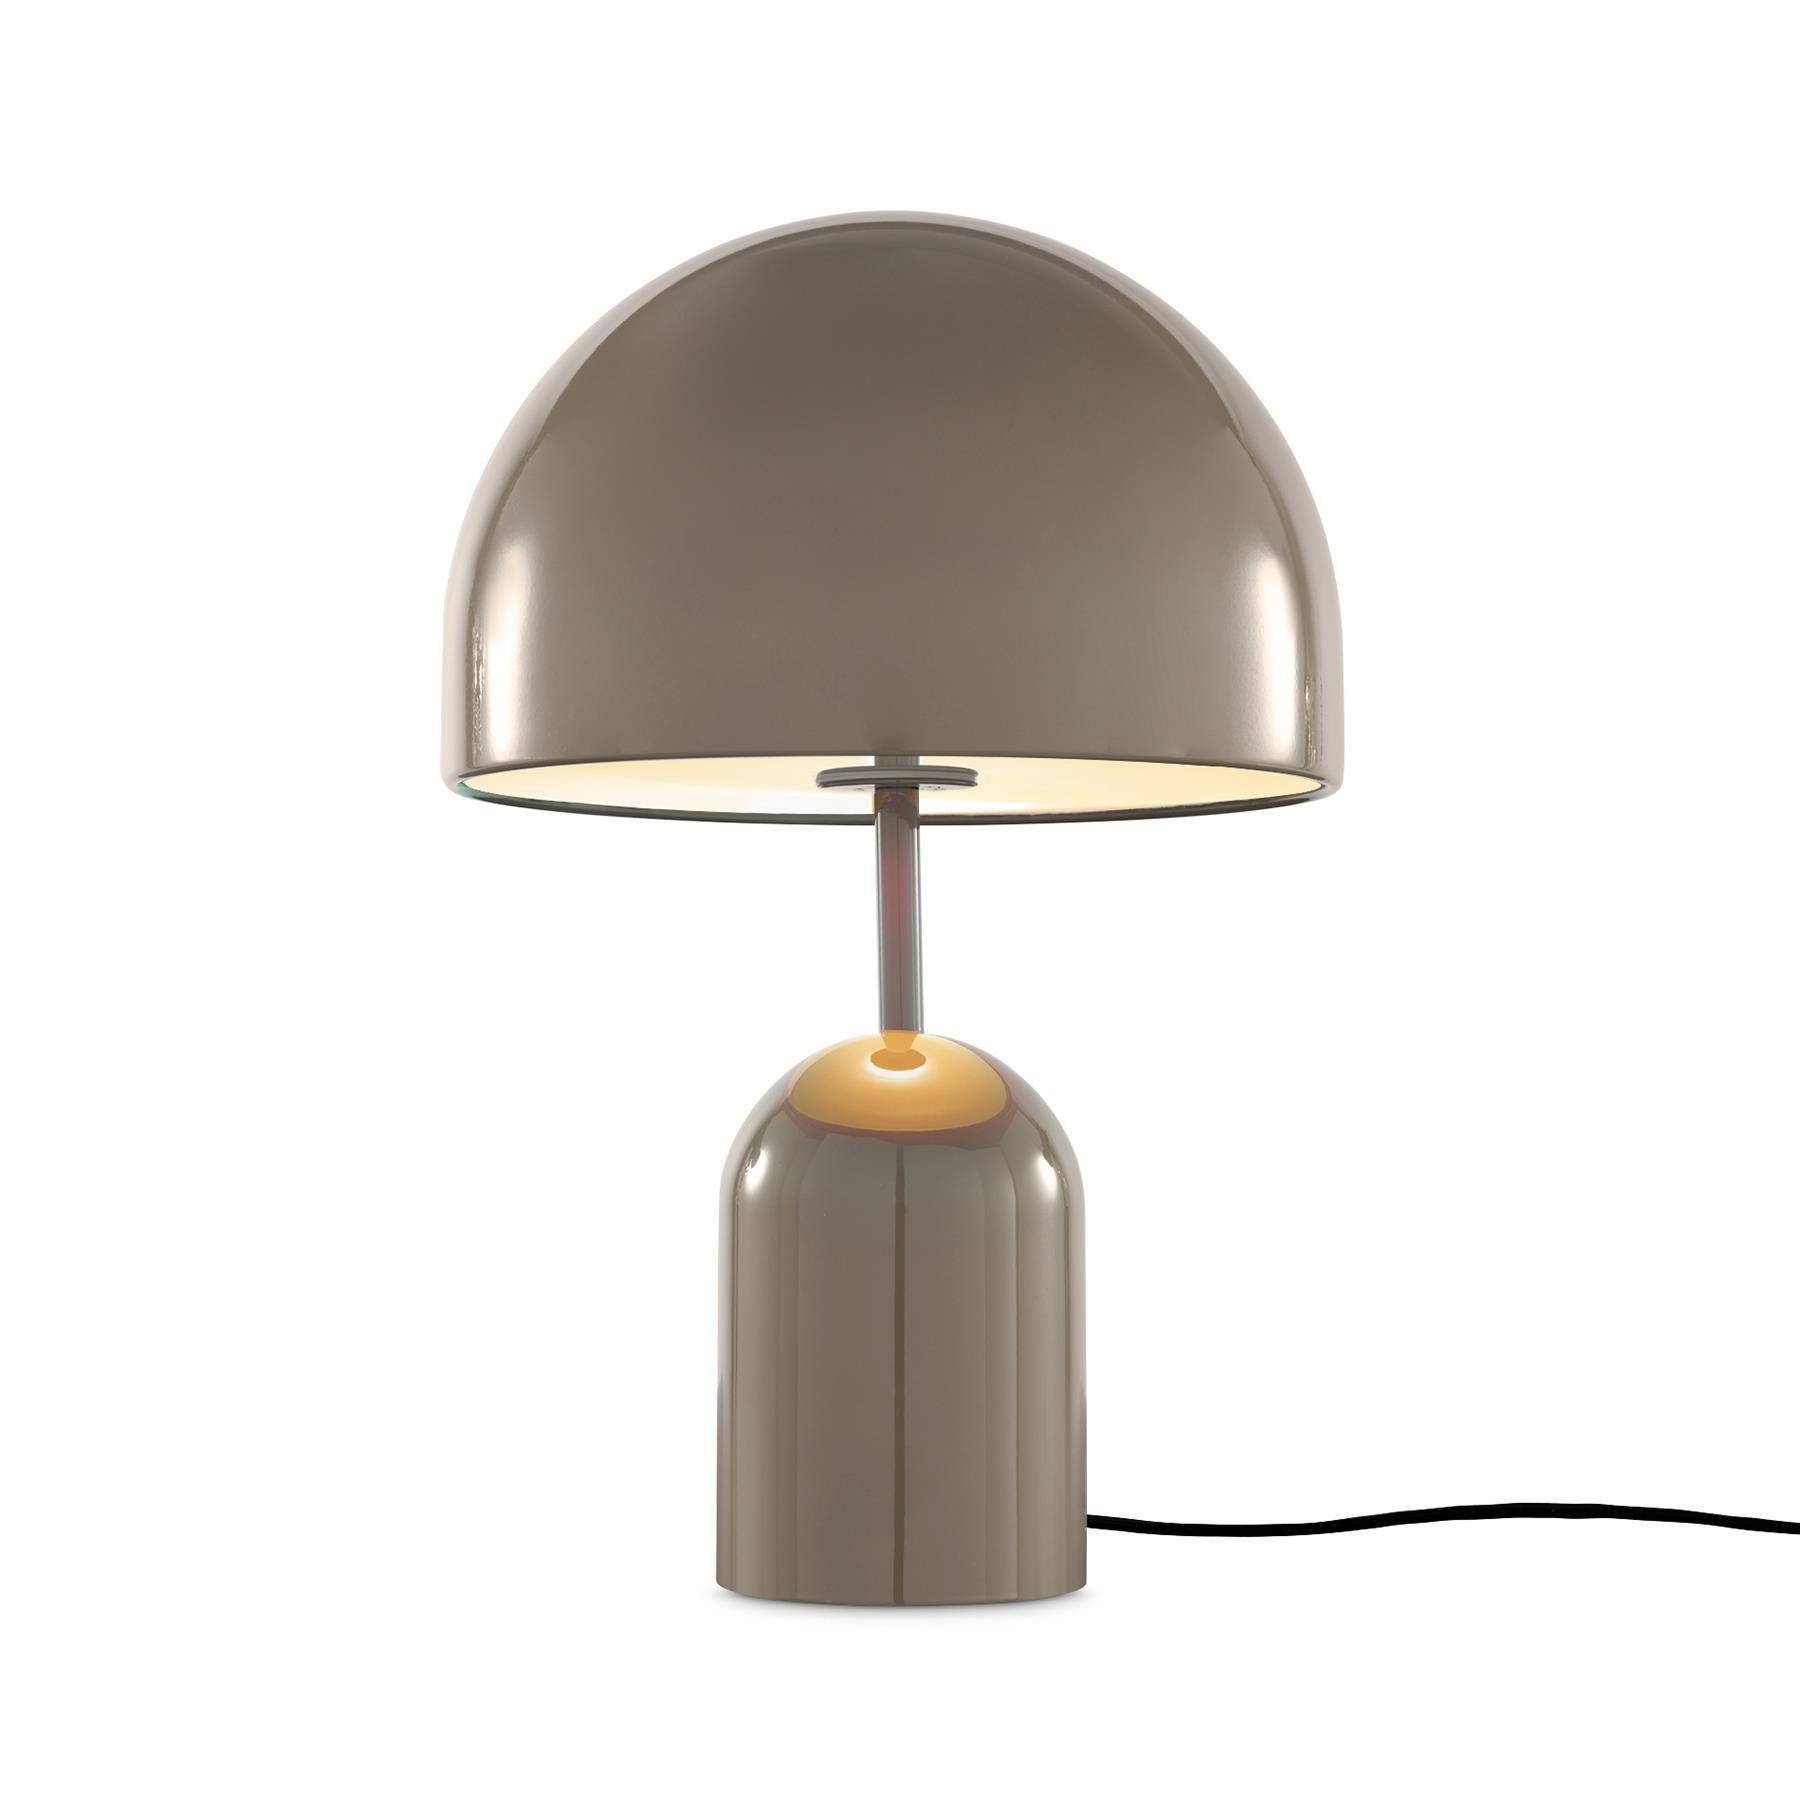 Tom Dixon Bell Led Table Lamp Taupe Brown Designer Lighting From Holloways Of Ludlow